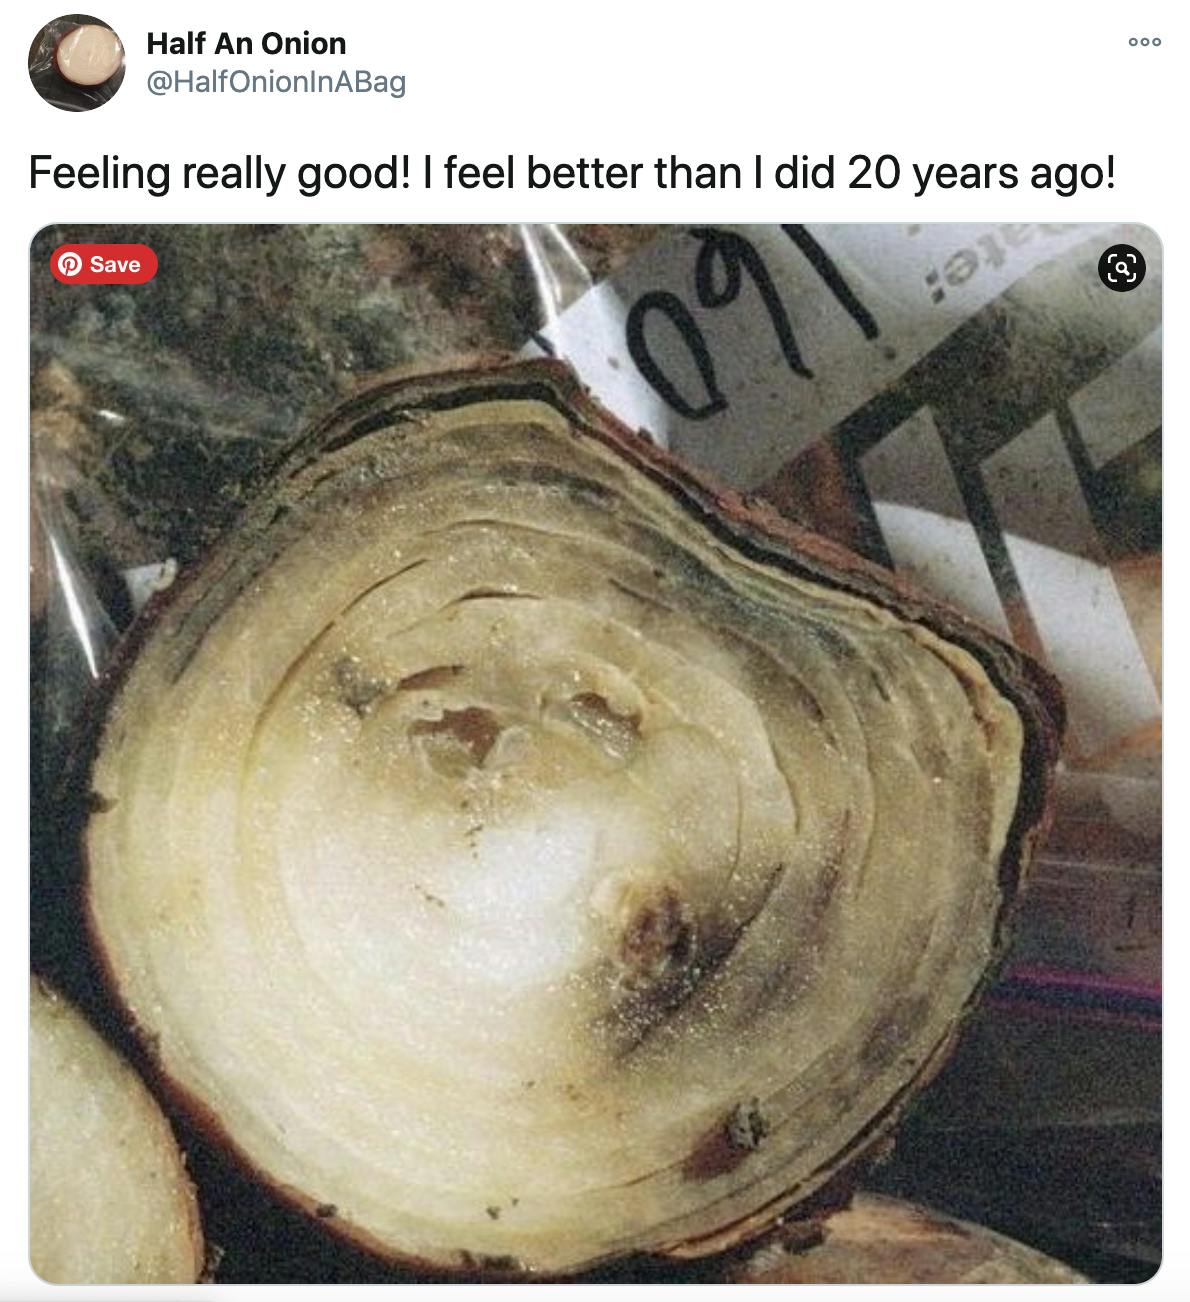 "Feeling really good! I feel better than I did 20 years ago!"  picture of a rotting onion